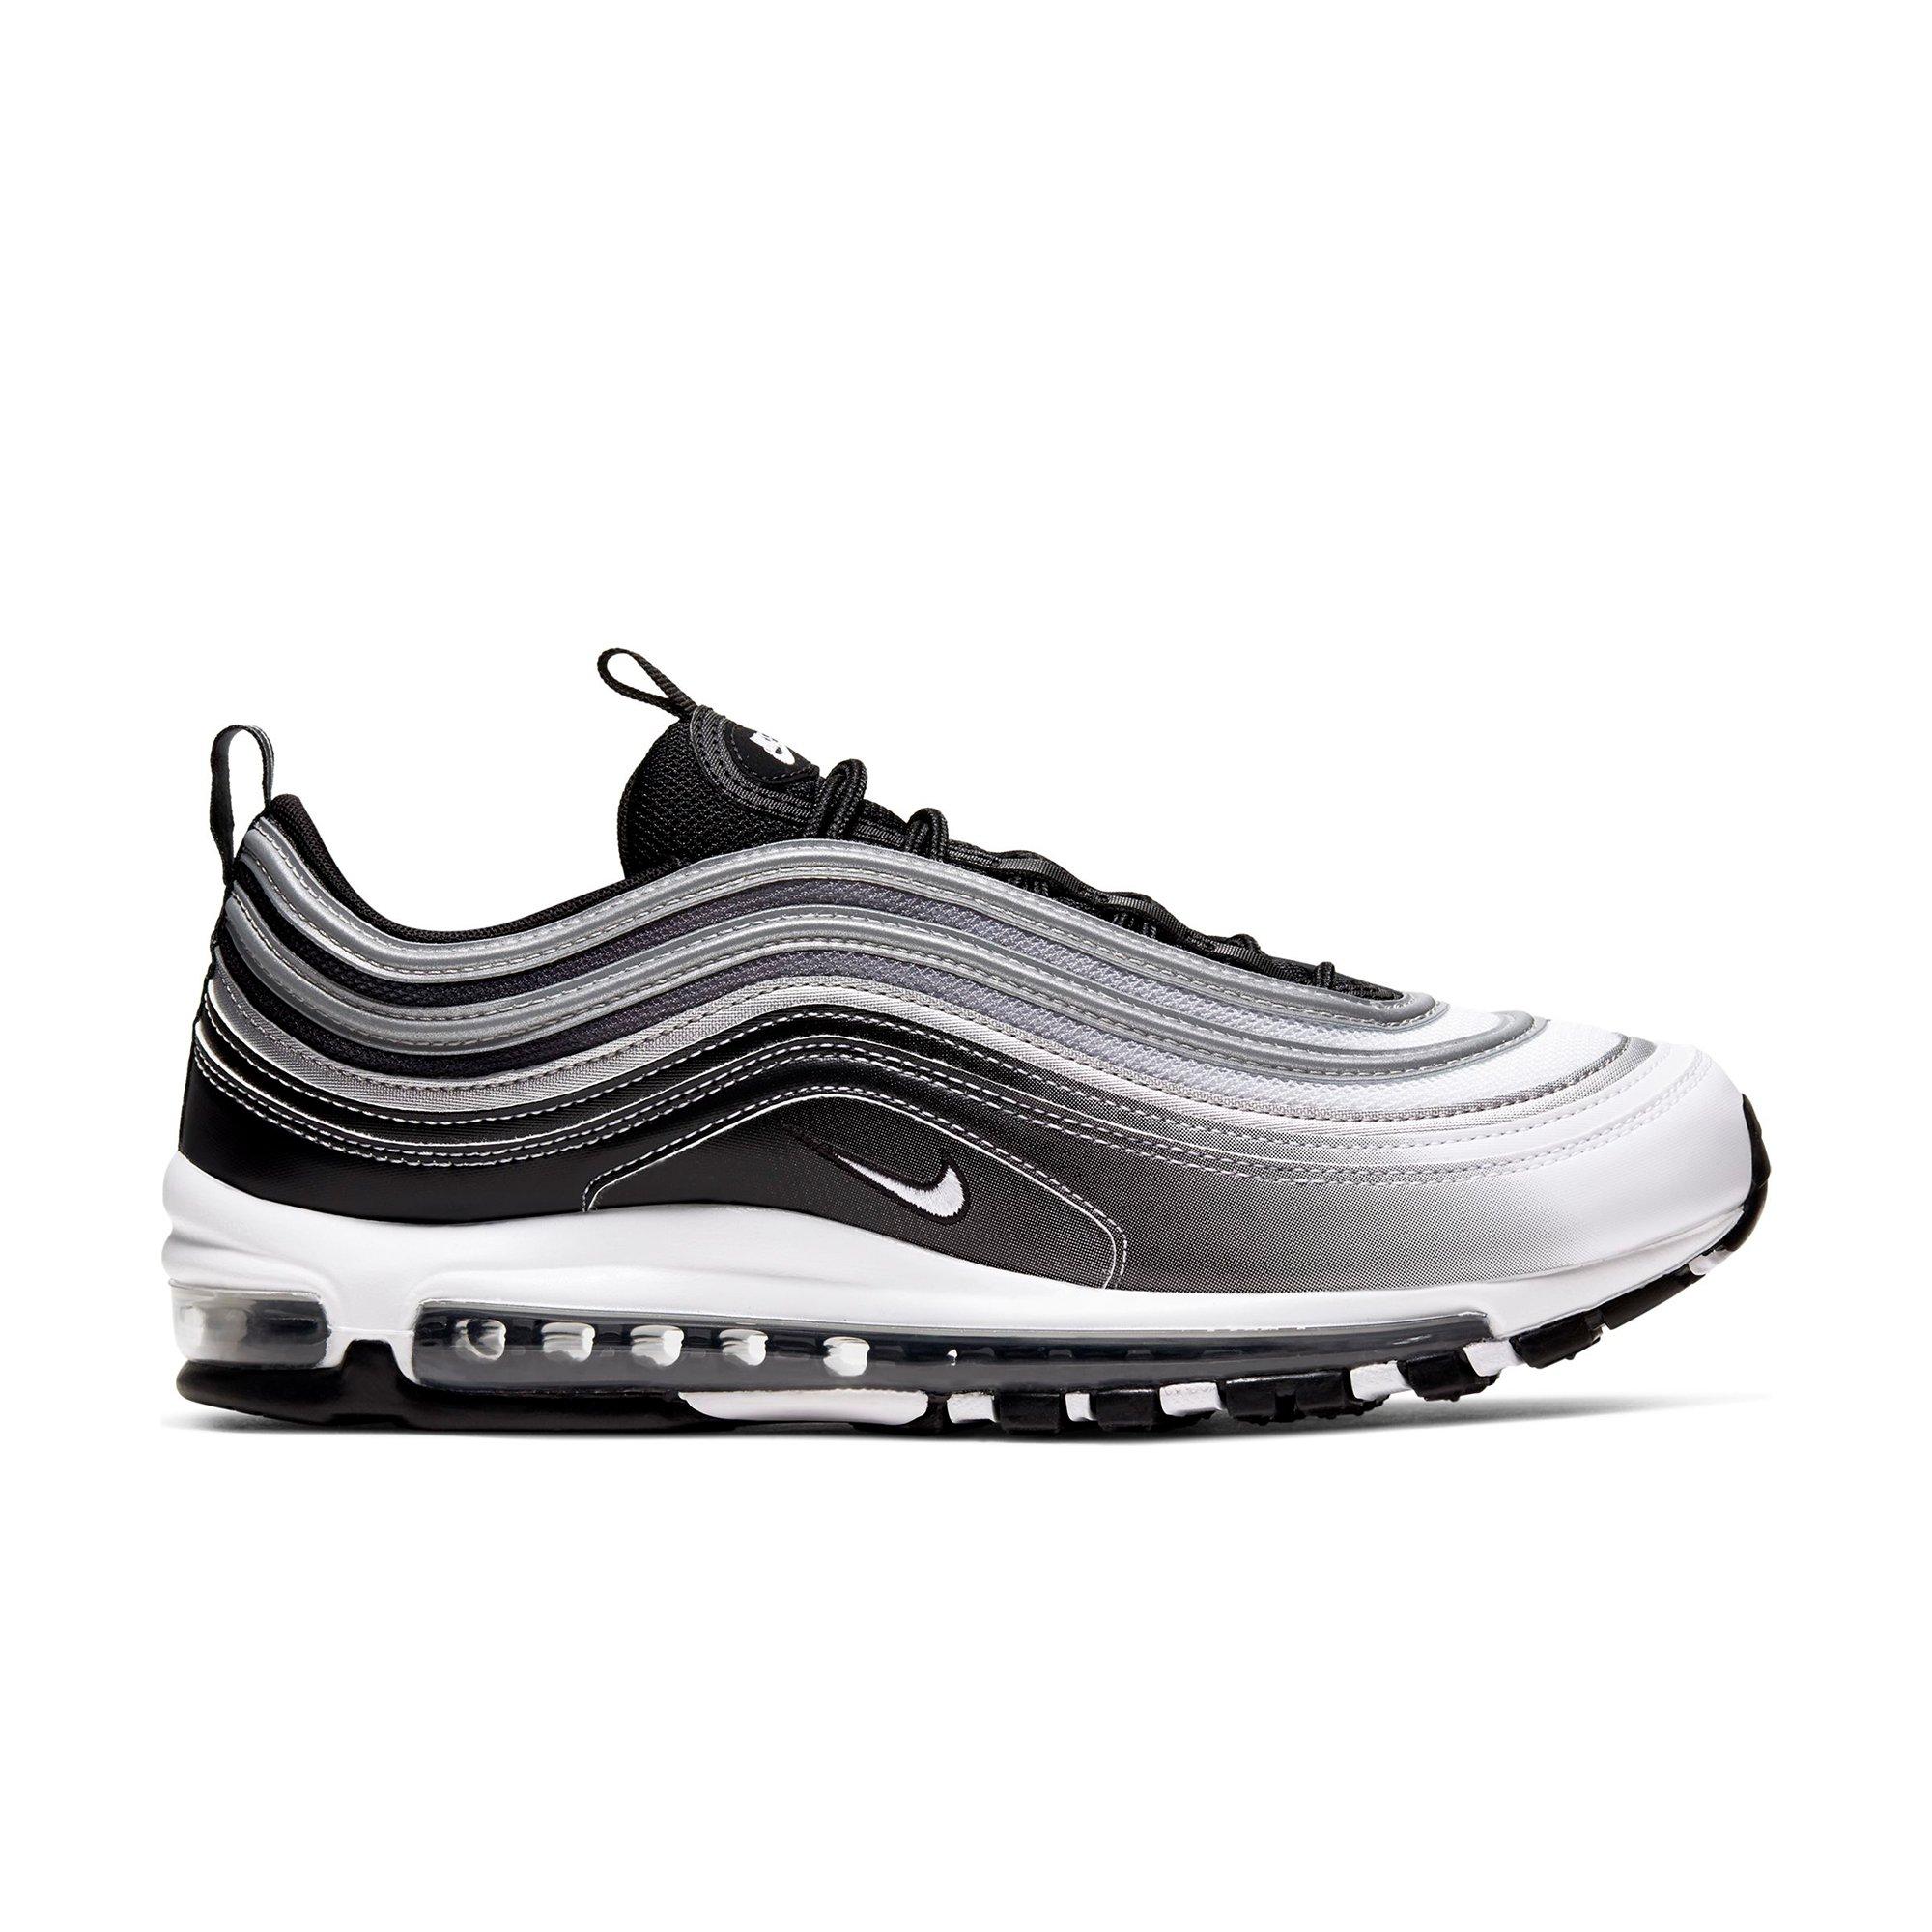 97s grey and black